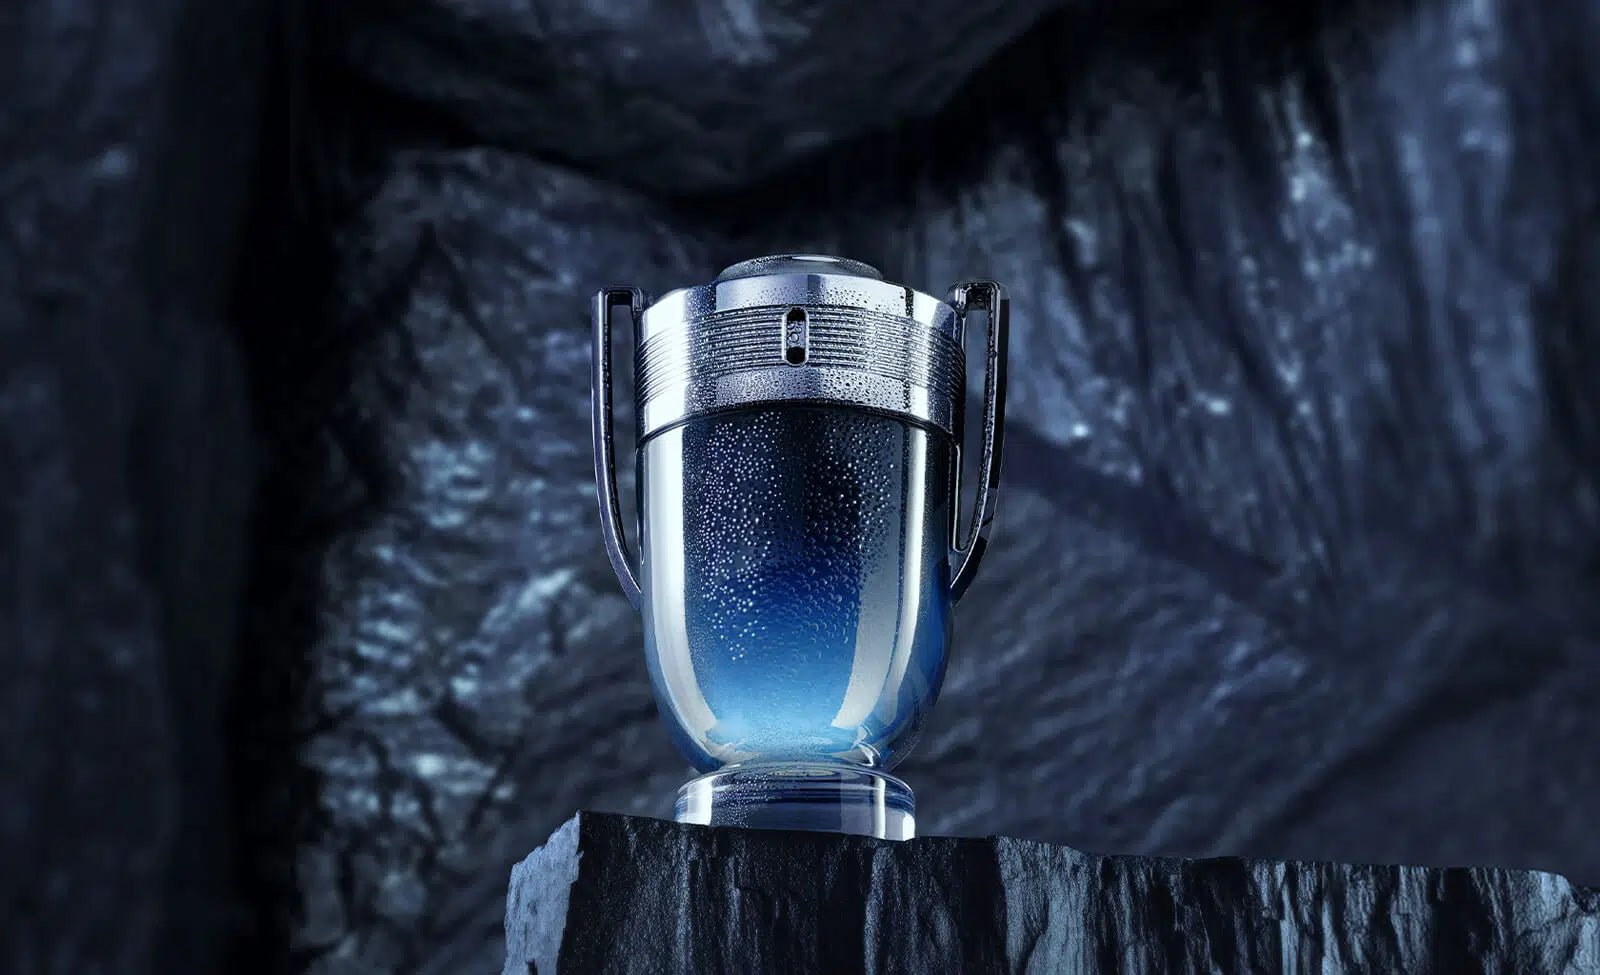 Expert Review of Paco Rabanne Invictus EDT